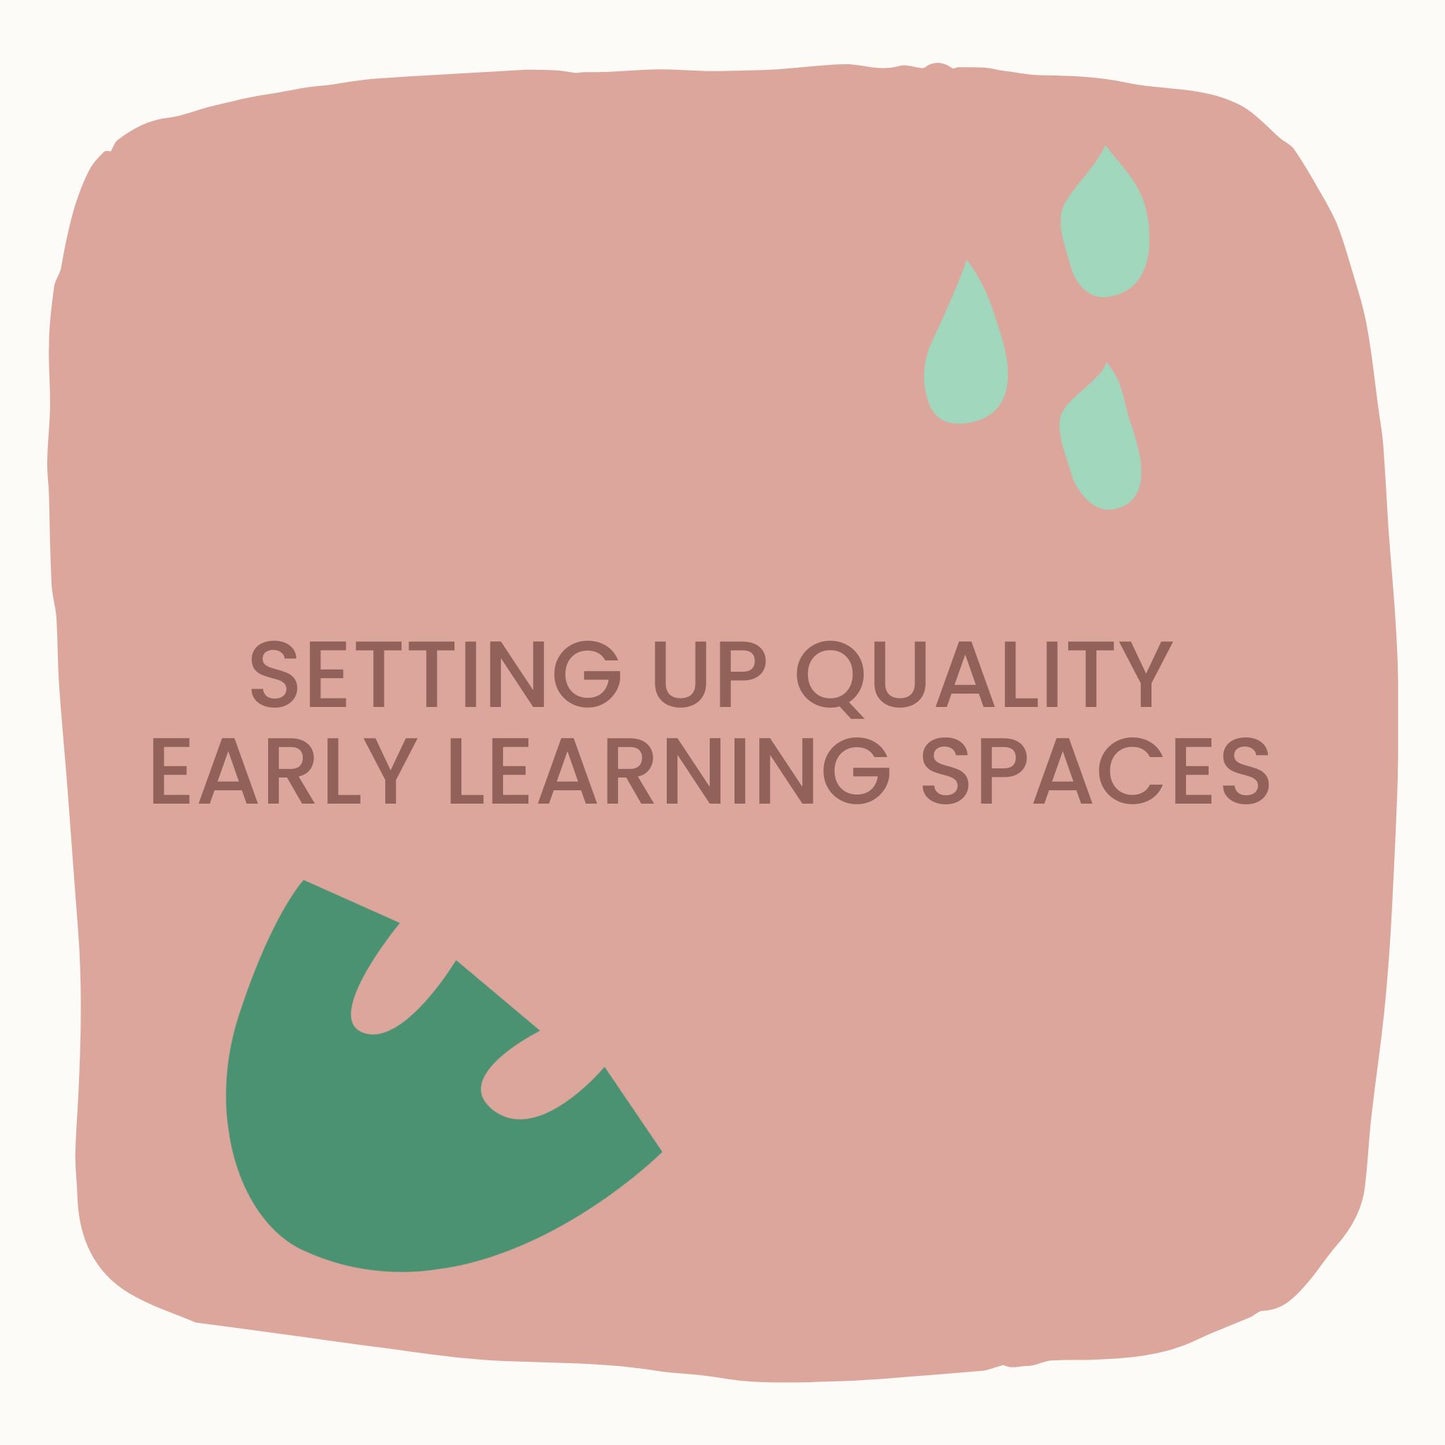 Setting up Enabling Learning Spaces 3-5yrs guide and critical reflection tool